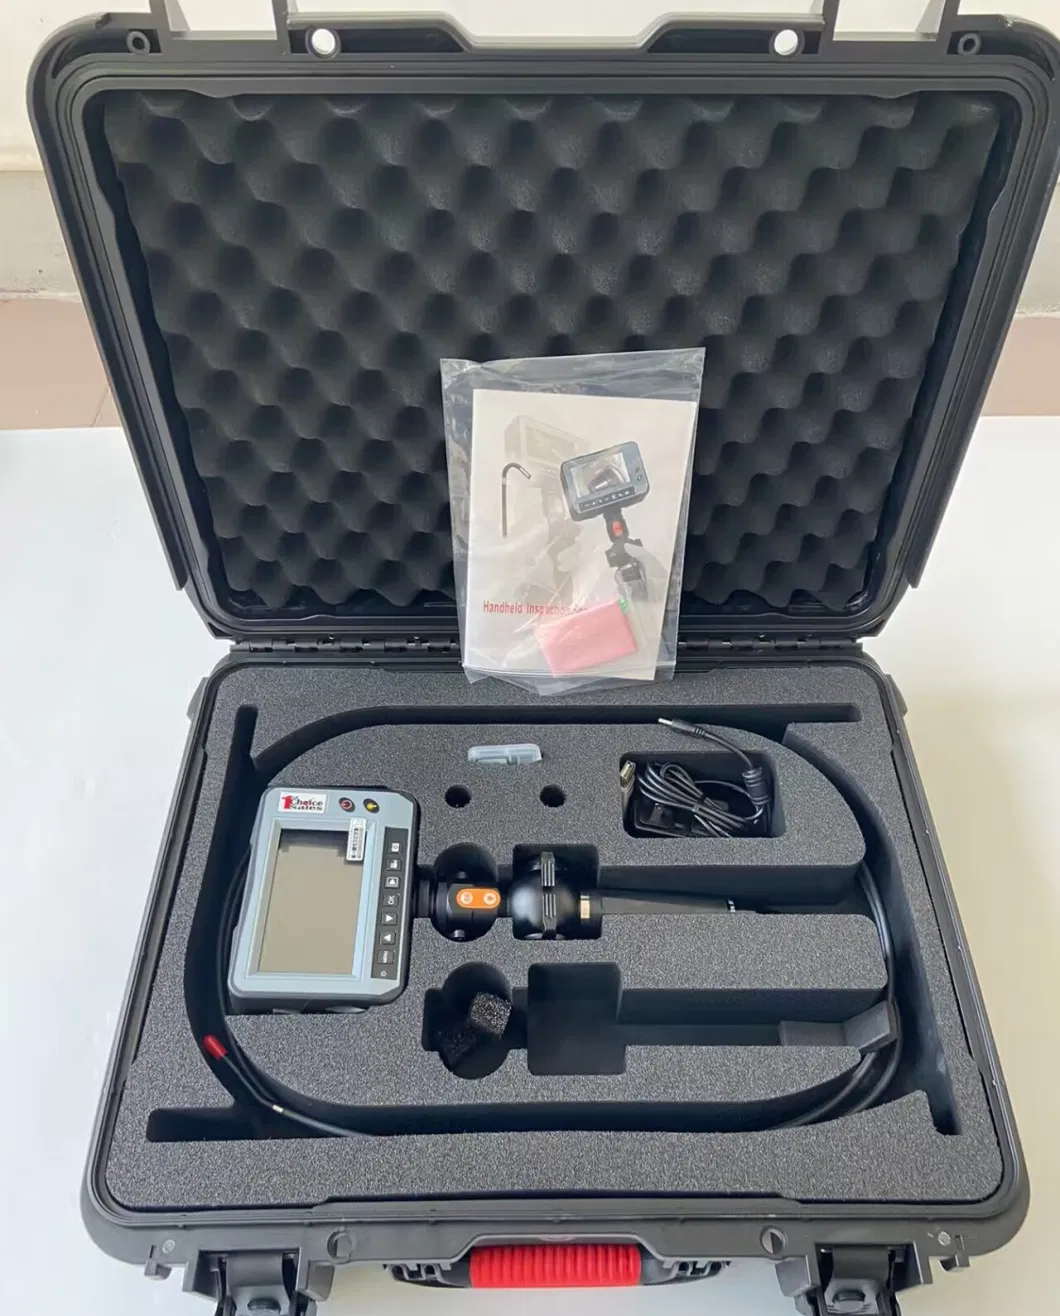 Portable Infrared Inspection Borescope with 1.5m Testing Cable IR940nm 8.0mm Camera Lens